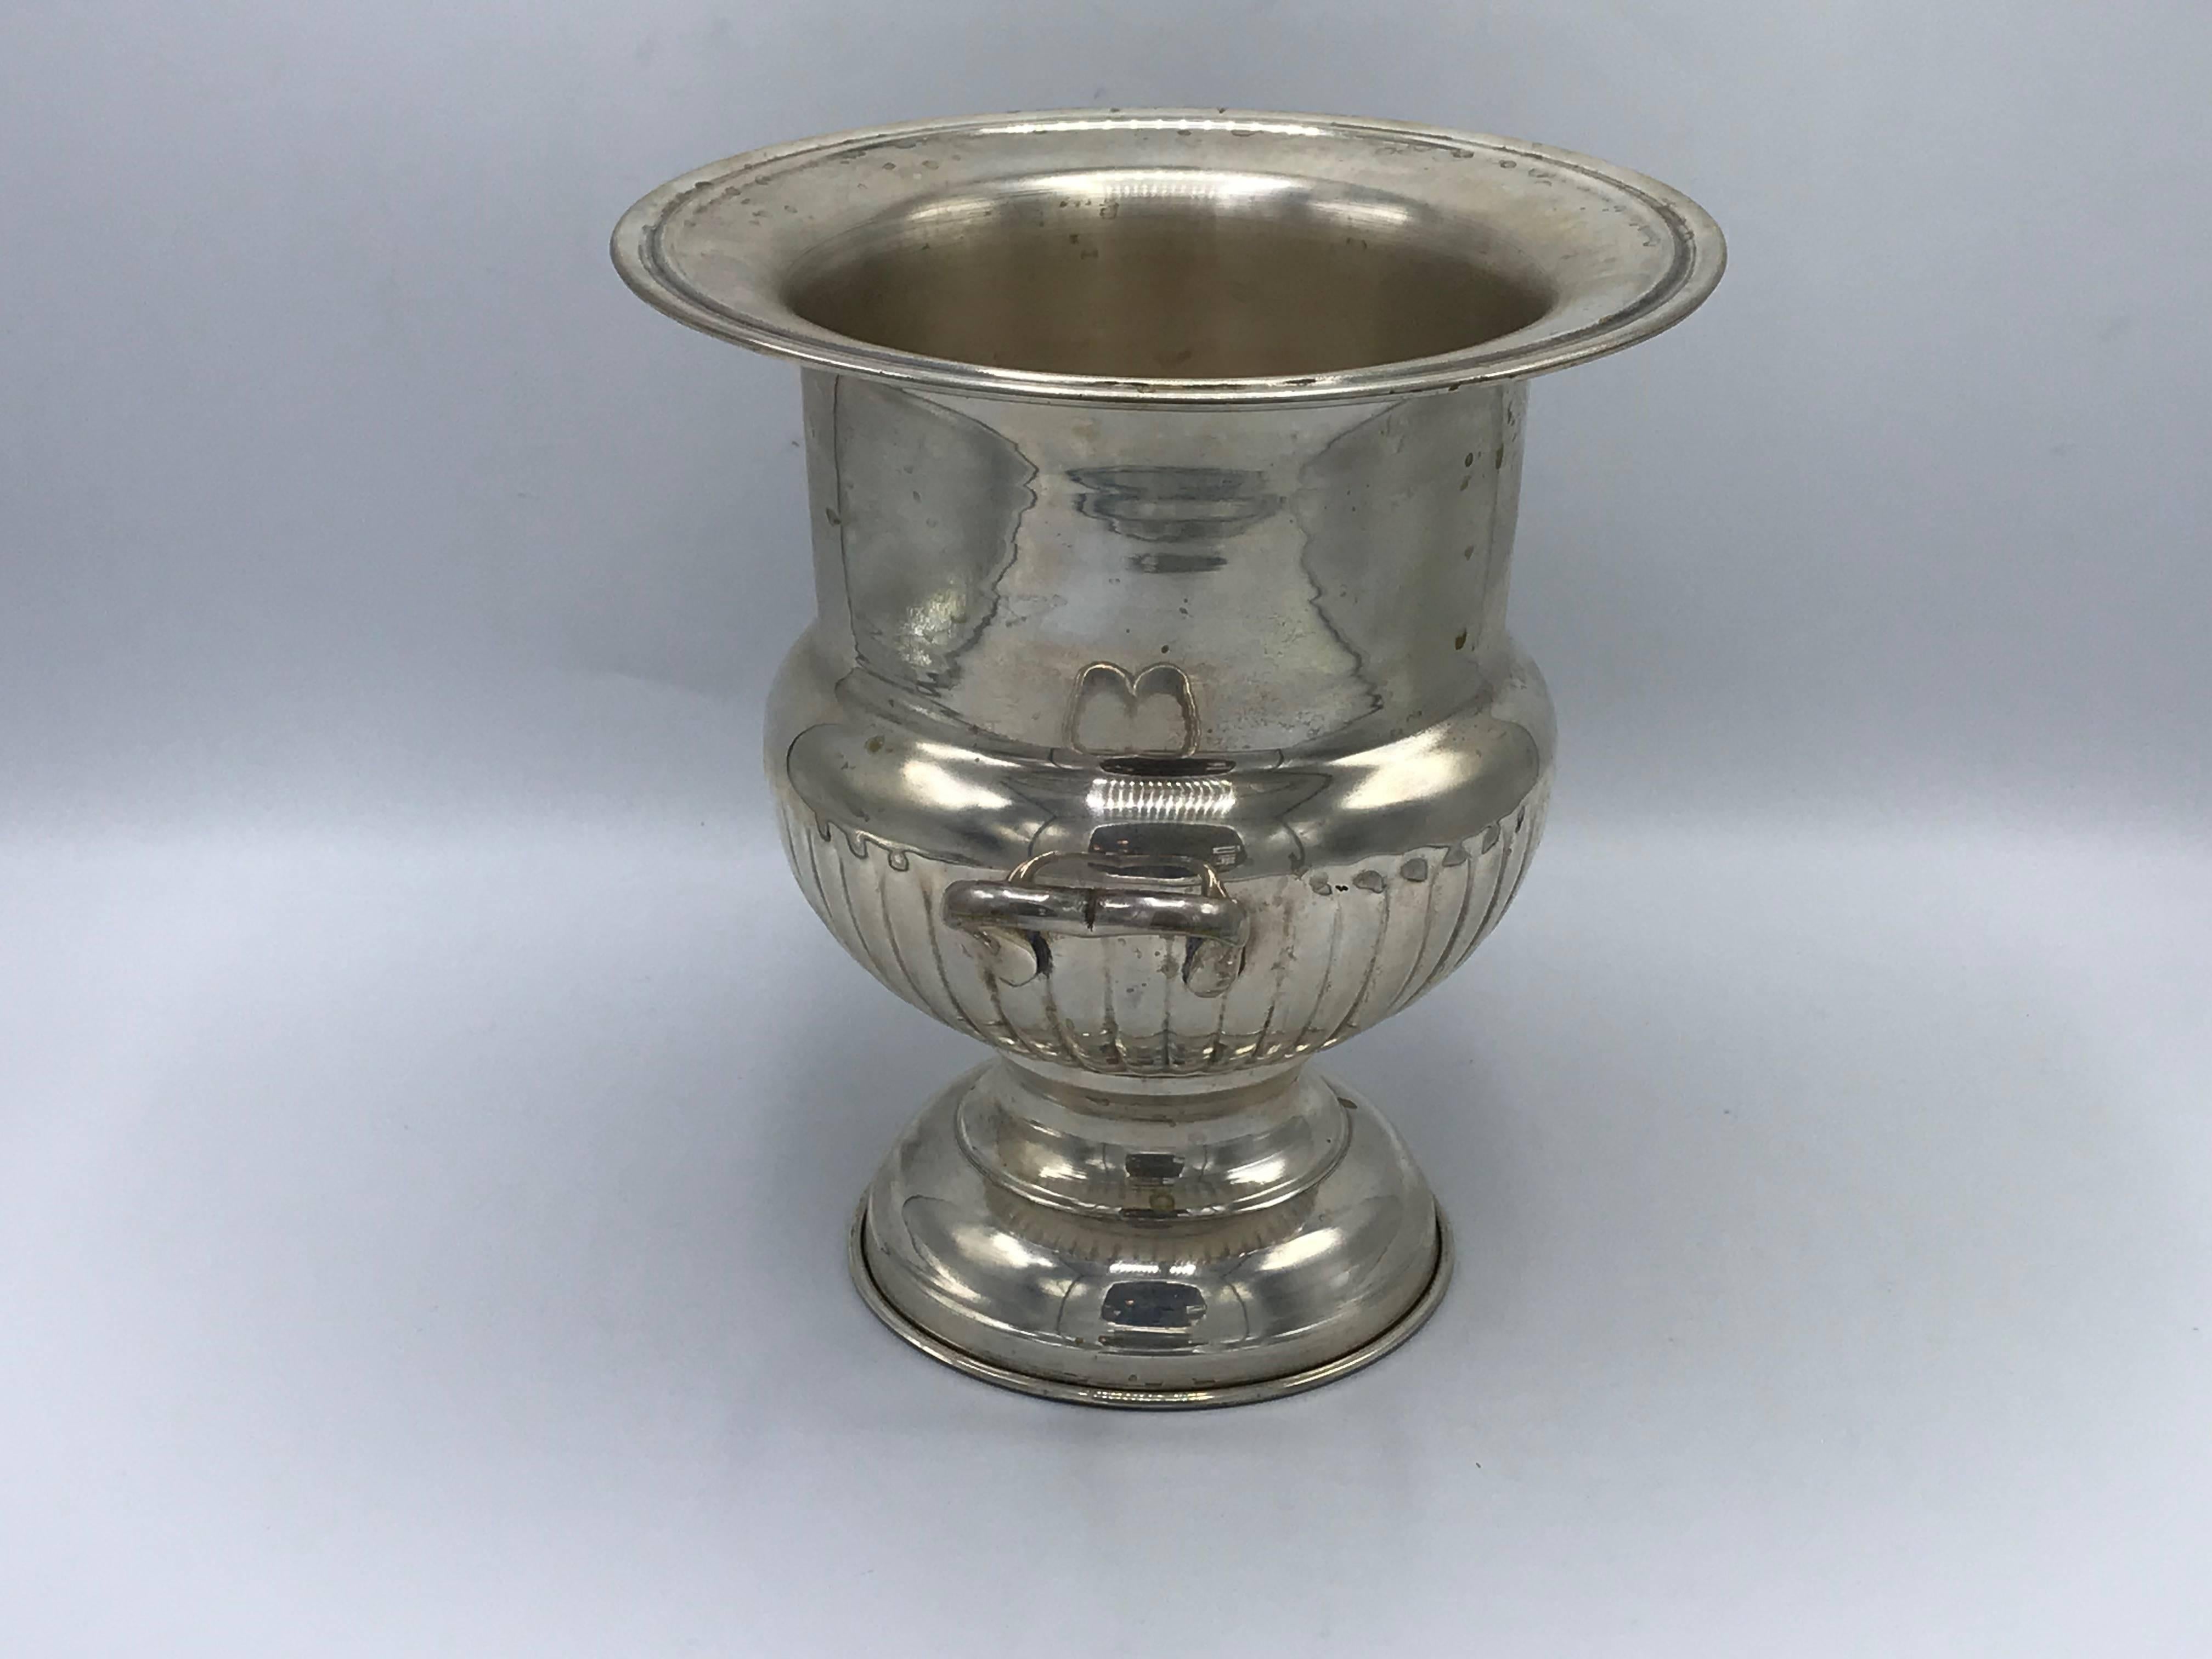 Offered is a beautiful, 1970s silver-plate wine chiller.